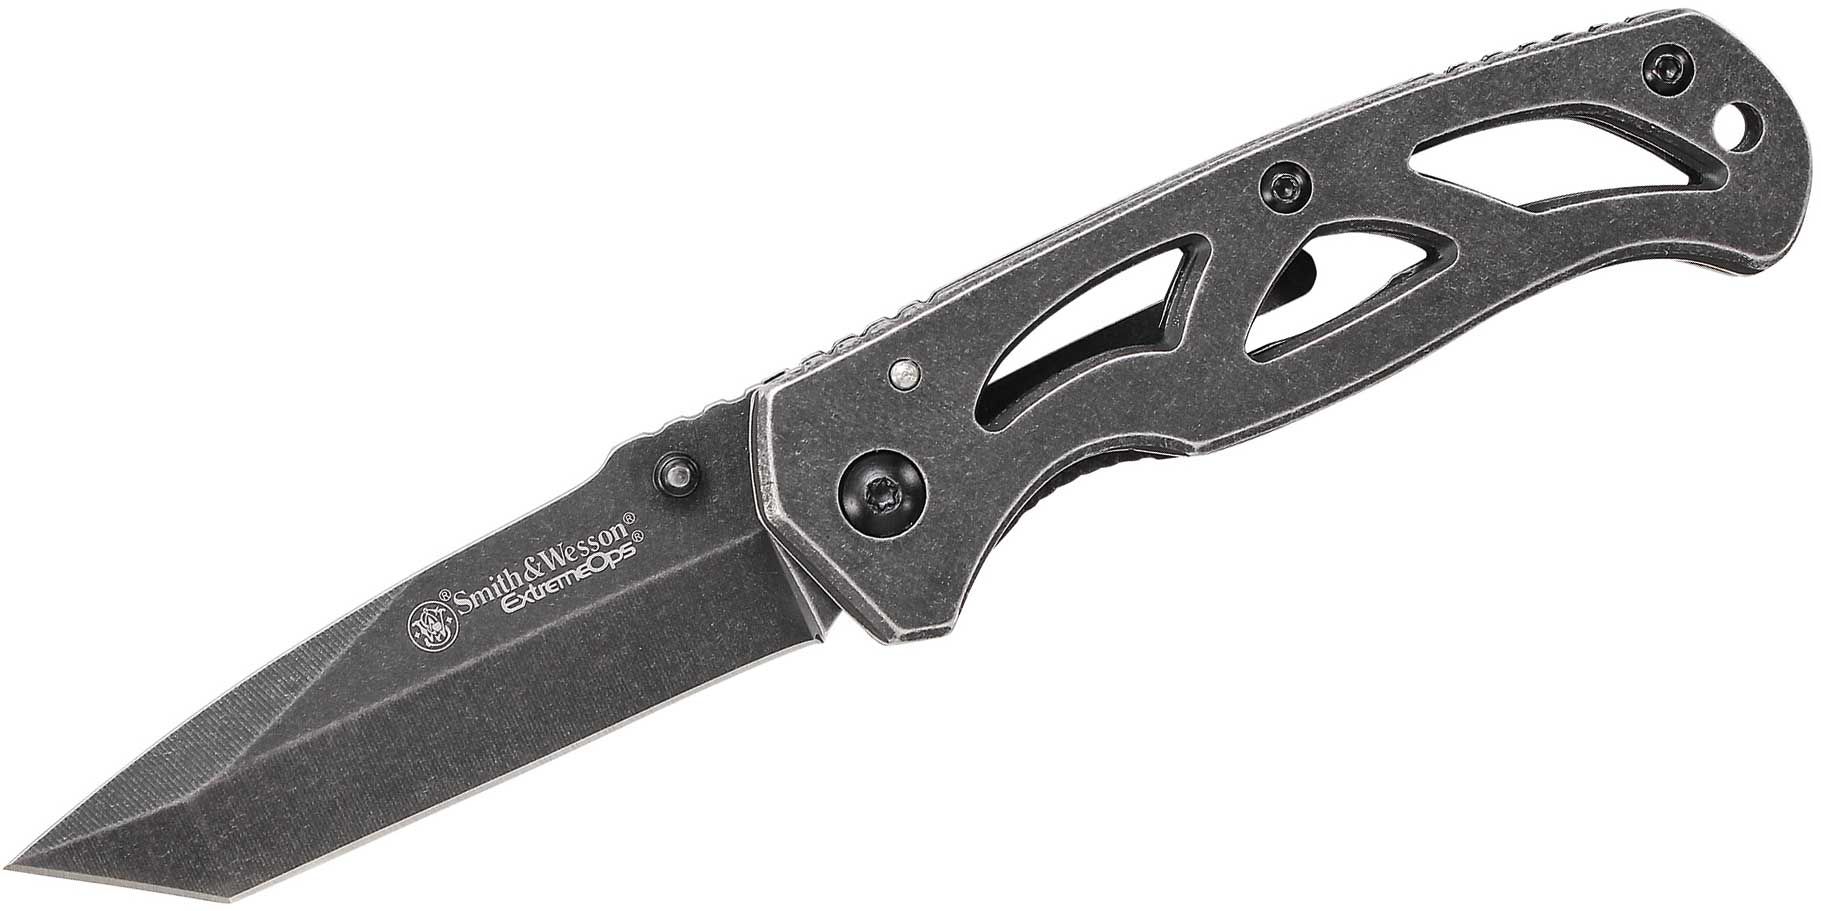 Smith & Wesson CK404 Extreme Ops Folding Knife 2-3/4